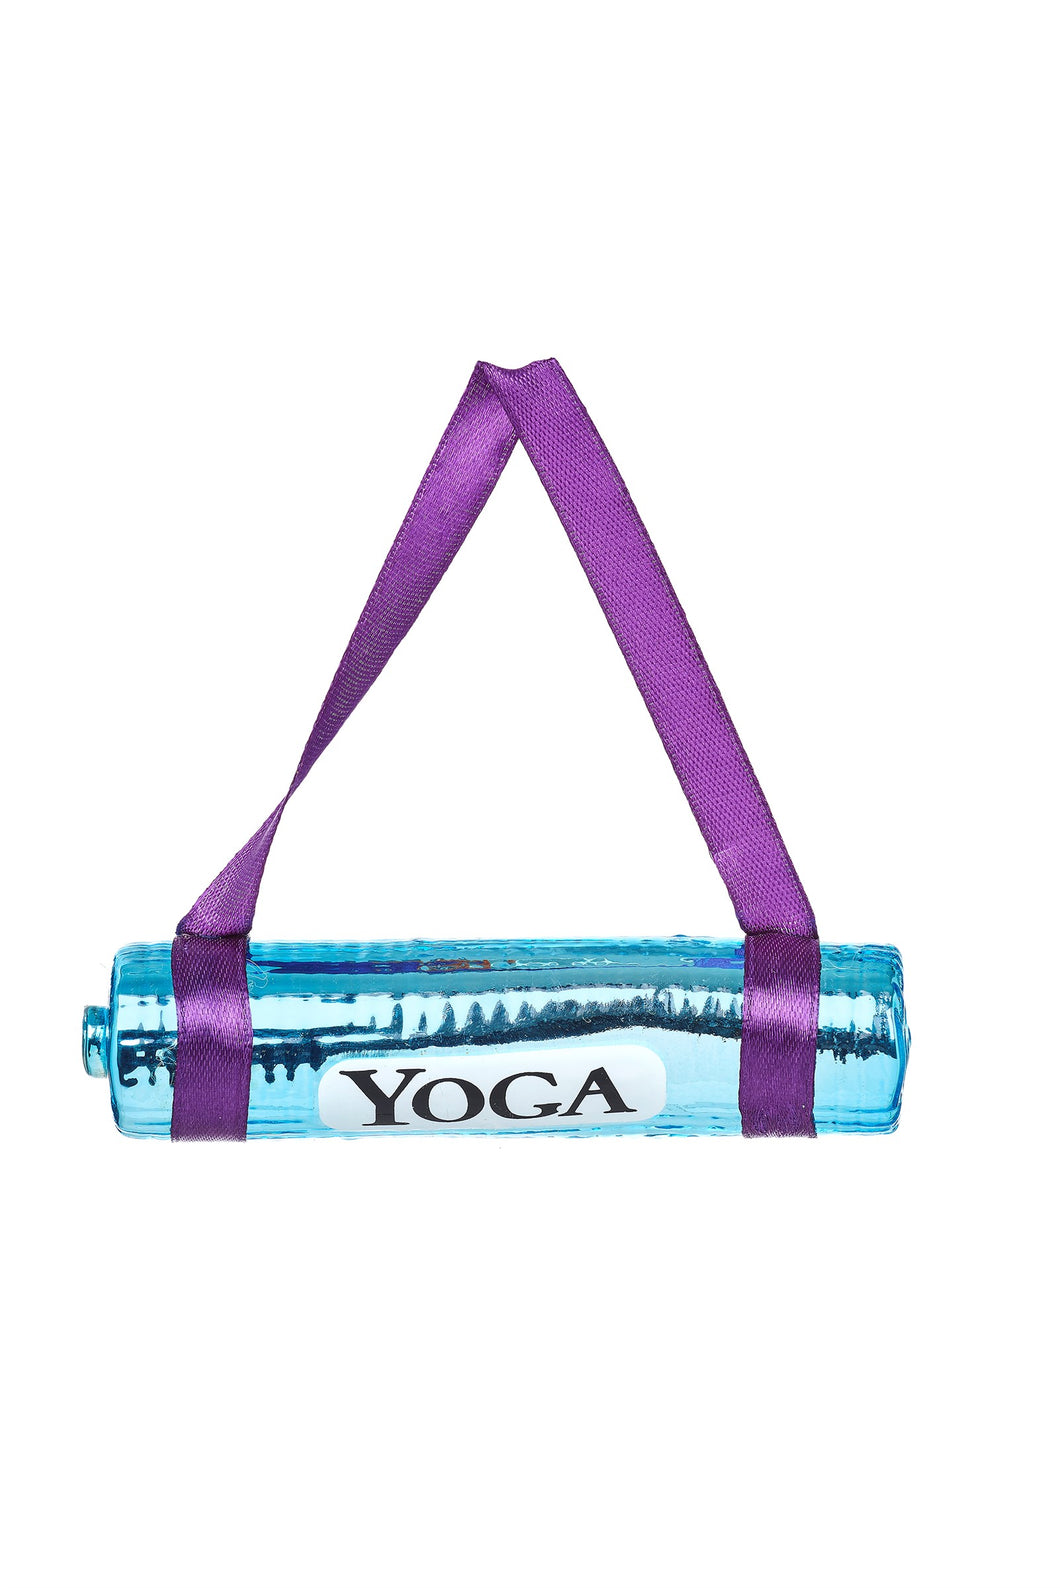 Sparkling Yoga Mat Christmas Tree Decoration by Sass & Belle